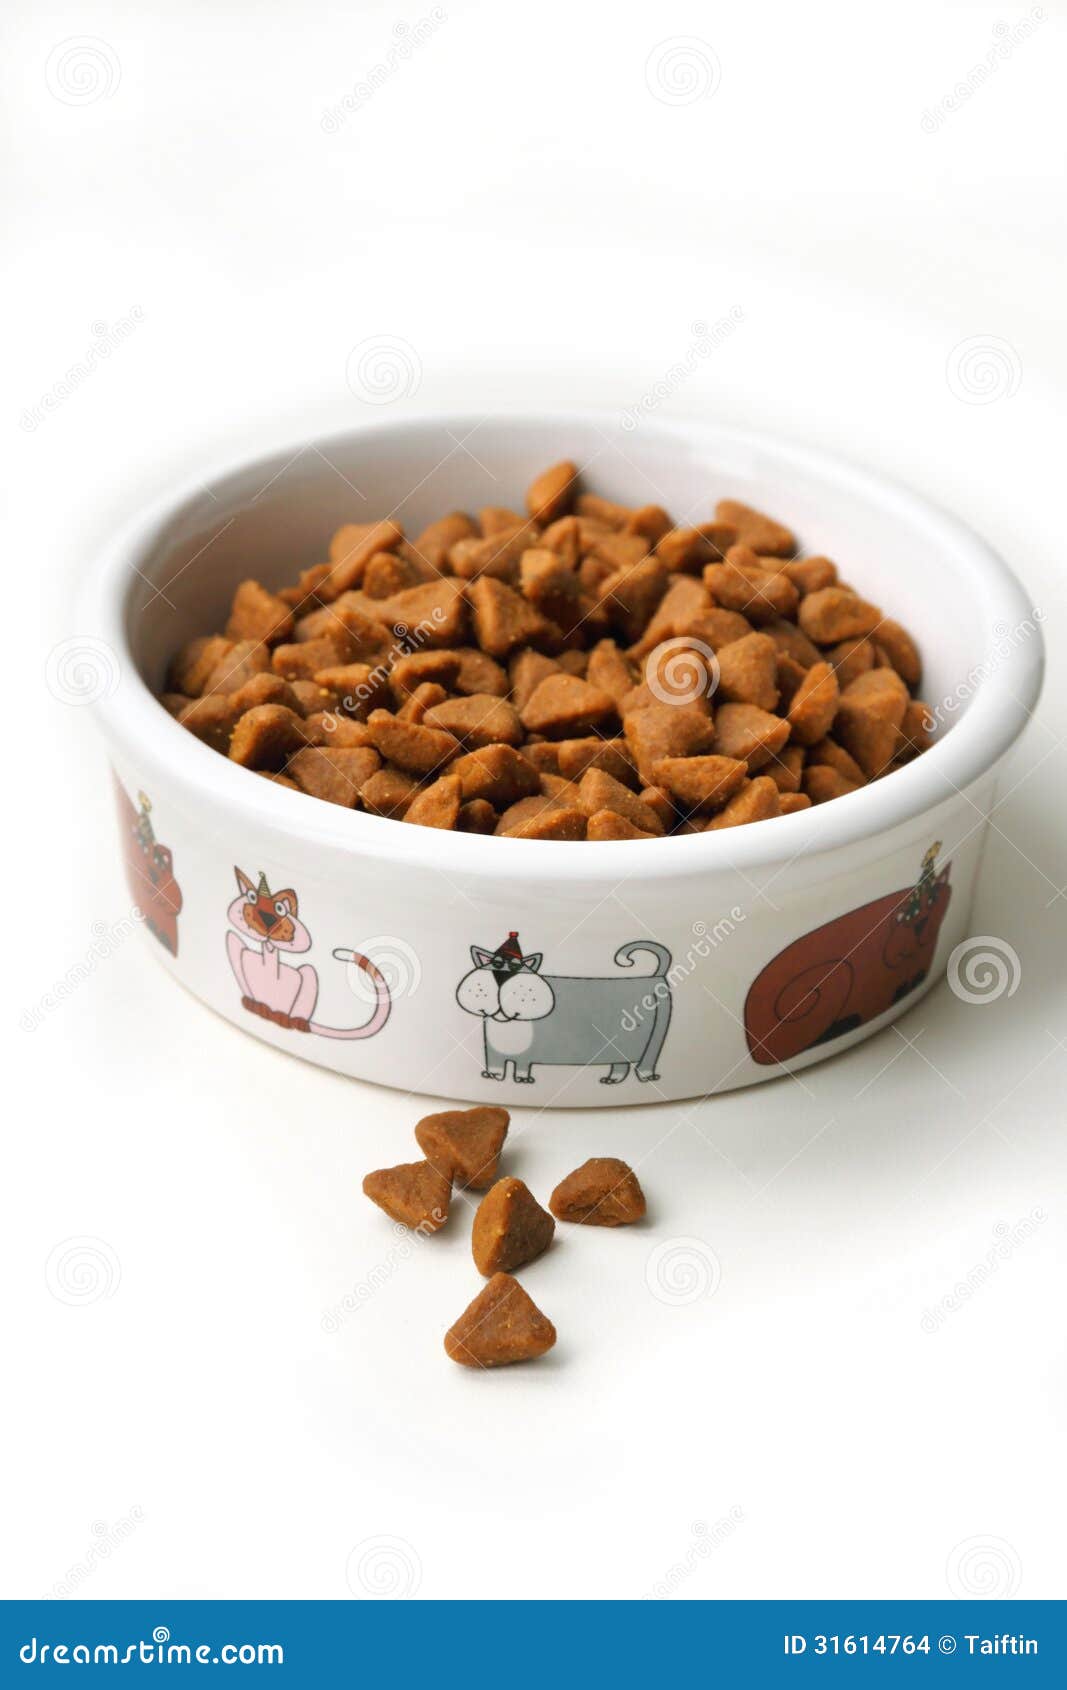 Dry Cat Food In A Ceramic Bowl Stock Images - Image: 31614764